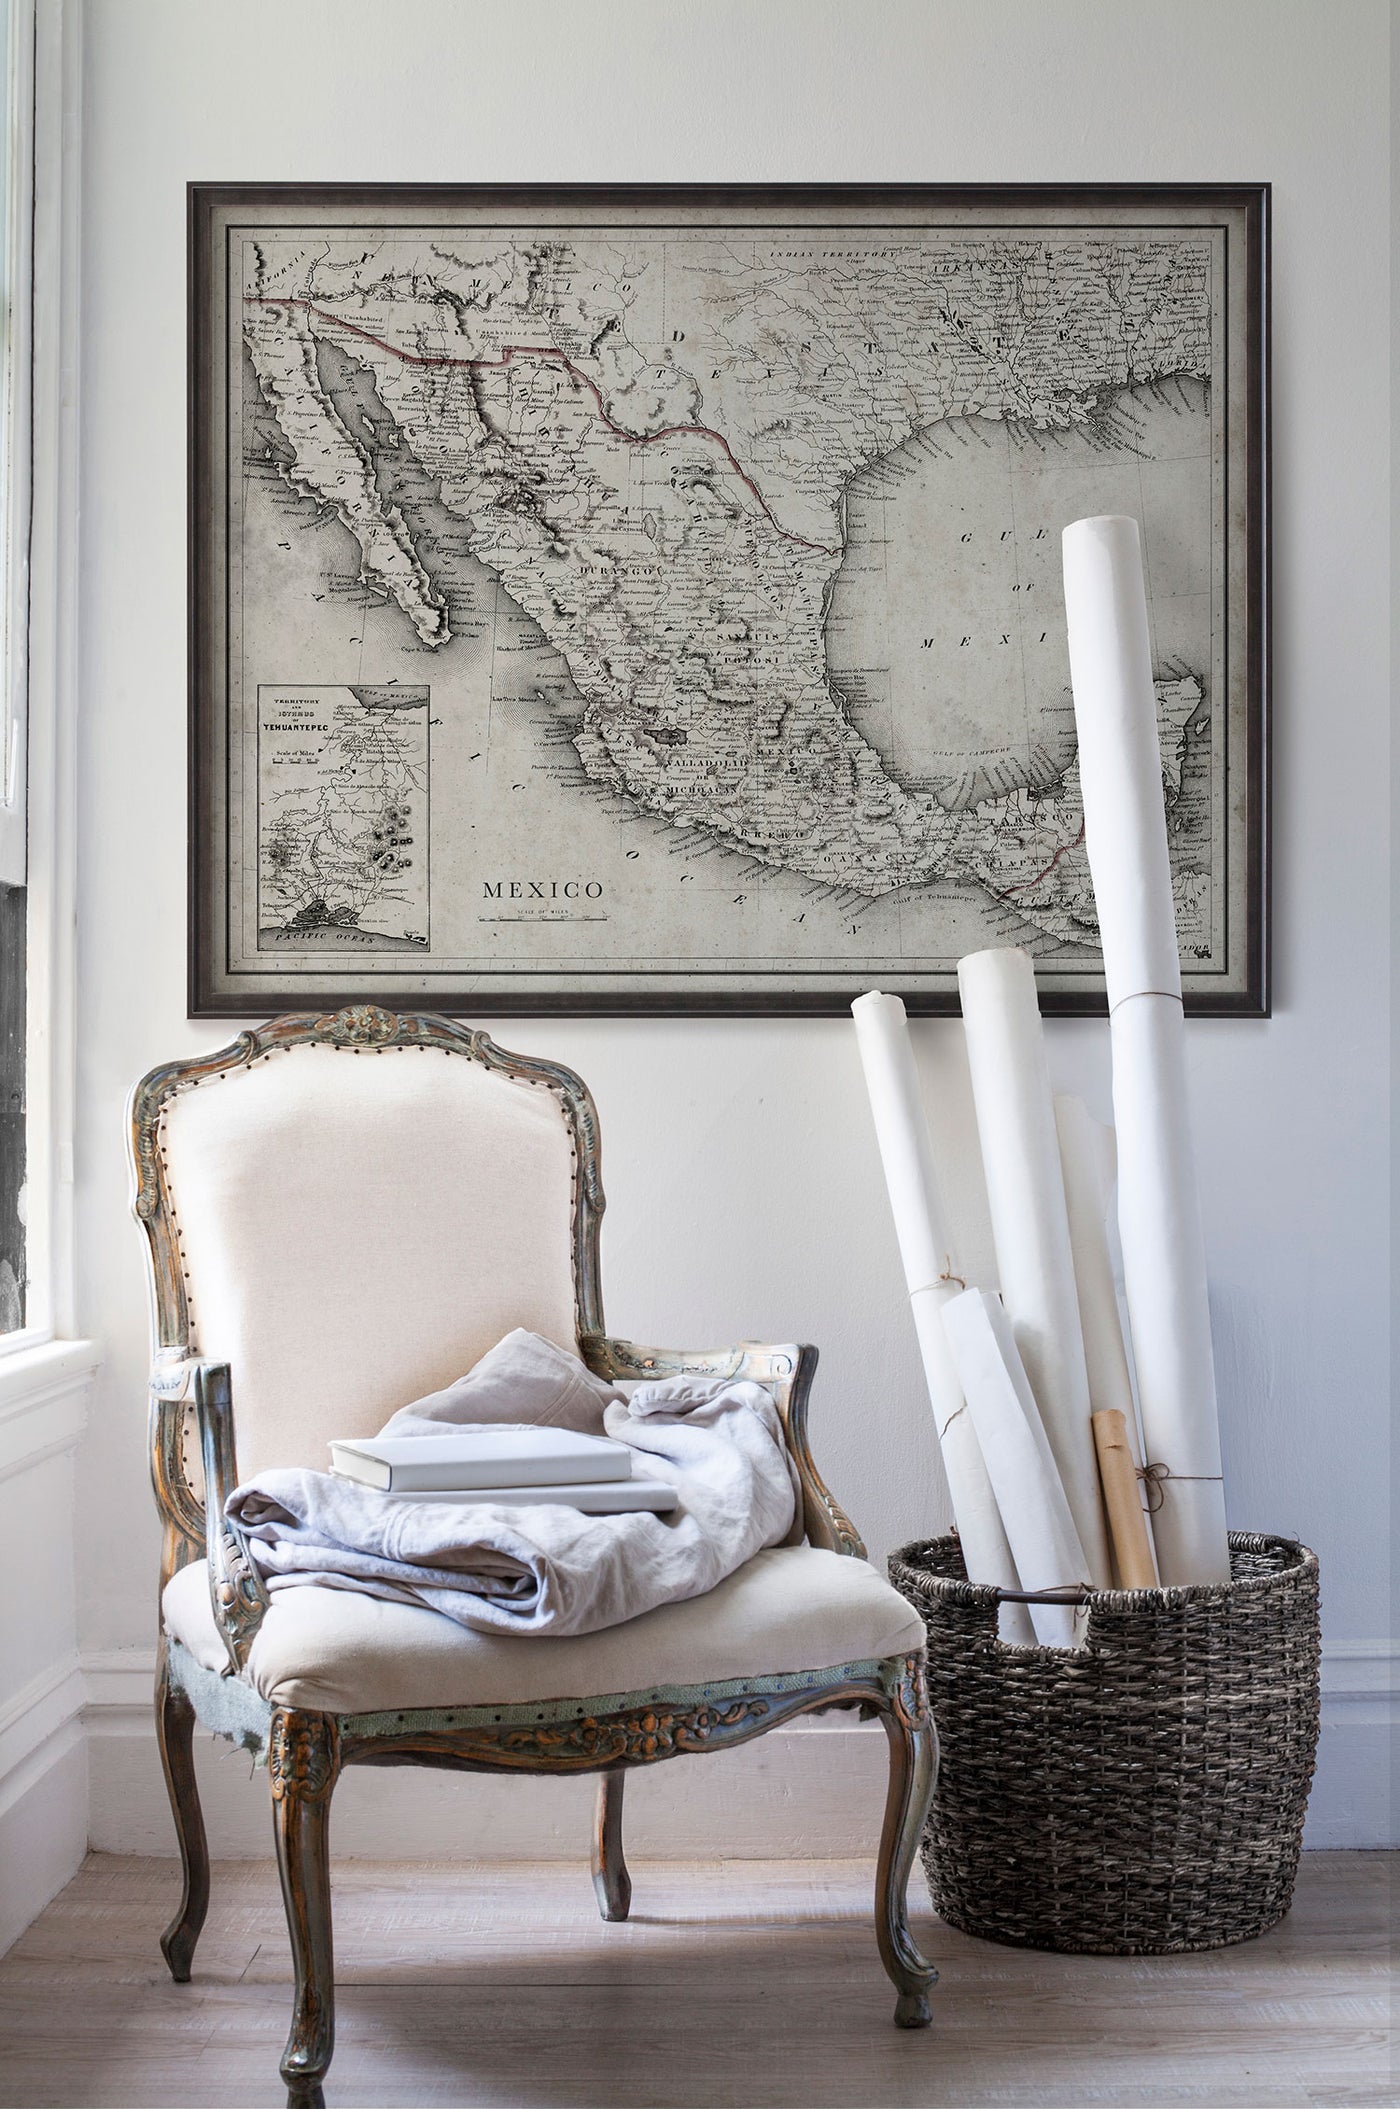 Vintage historic road map of Mexico in room with white walls with vintage furniture and vintage decor.